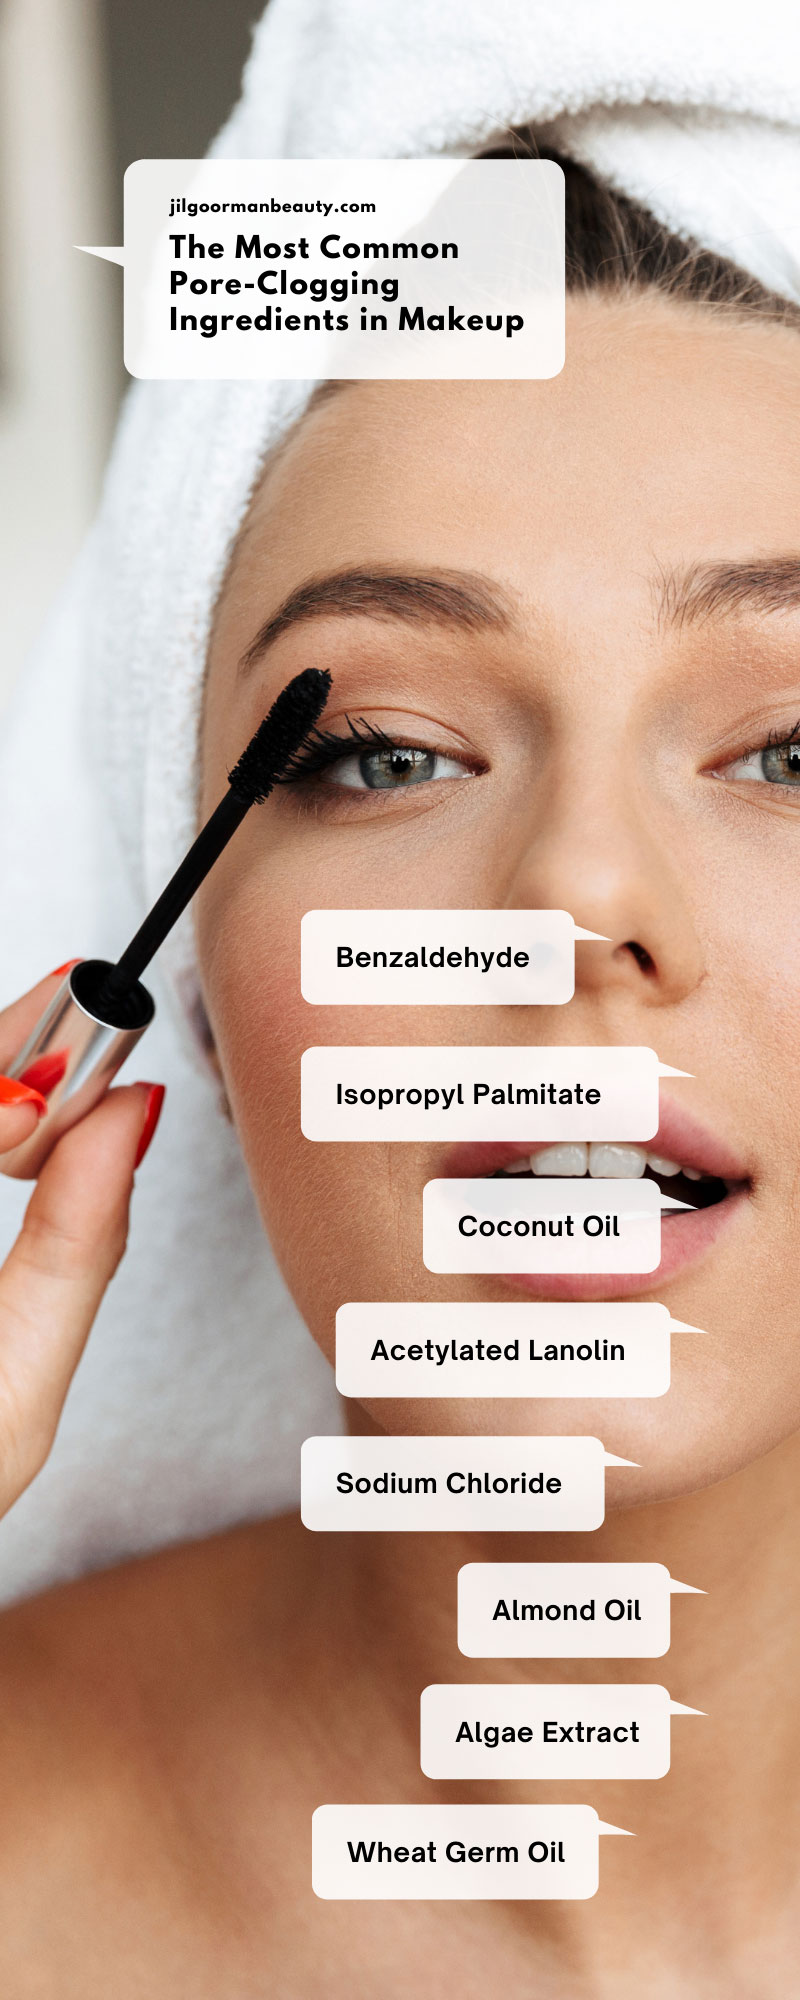 The Most Common Pore-Clogging Ingredients in Makeup